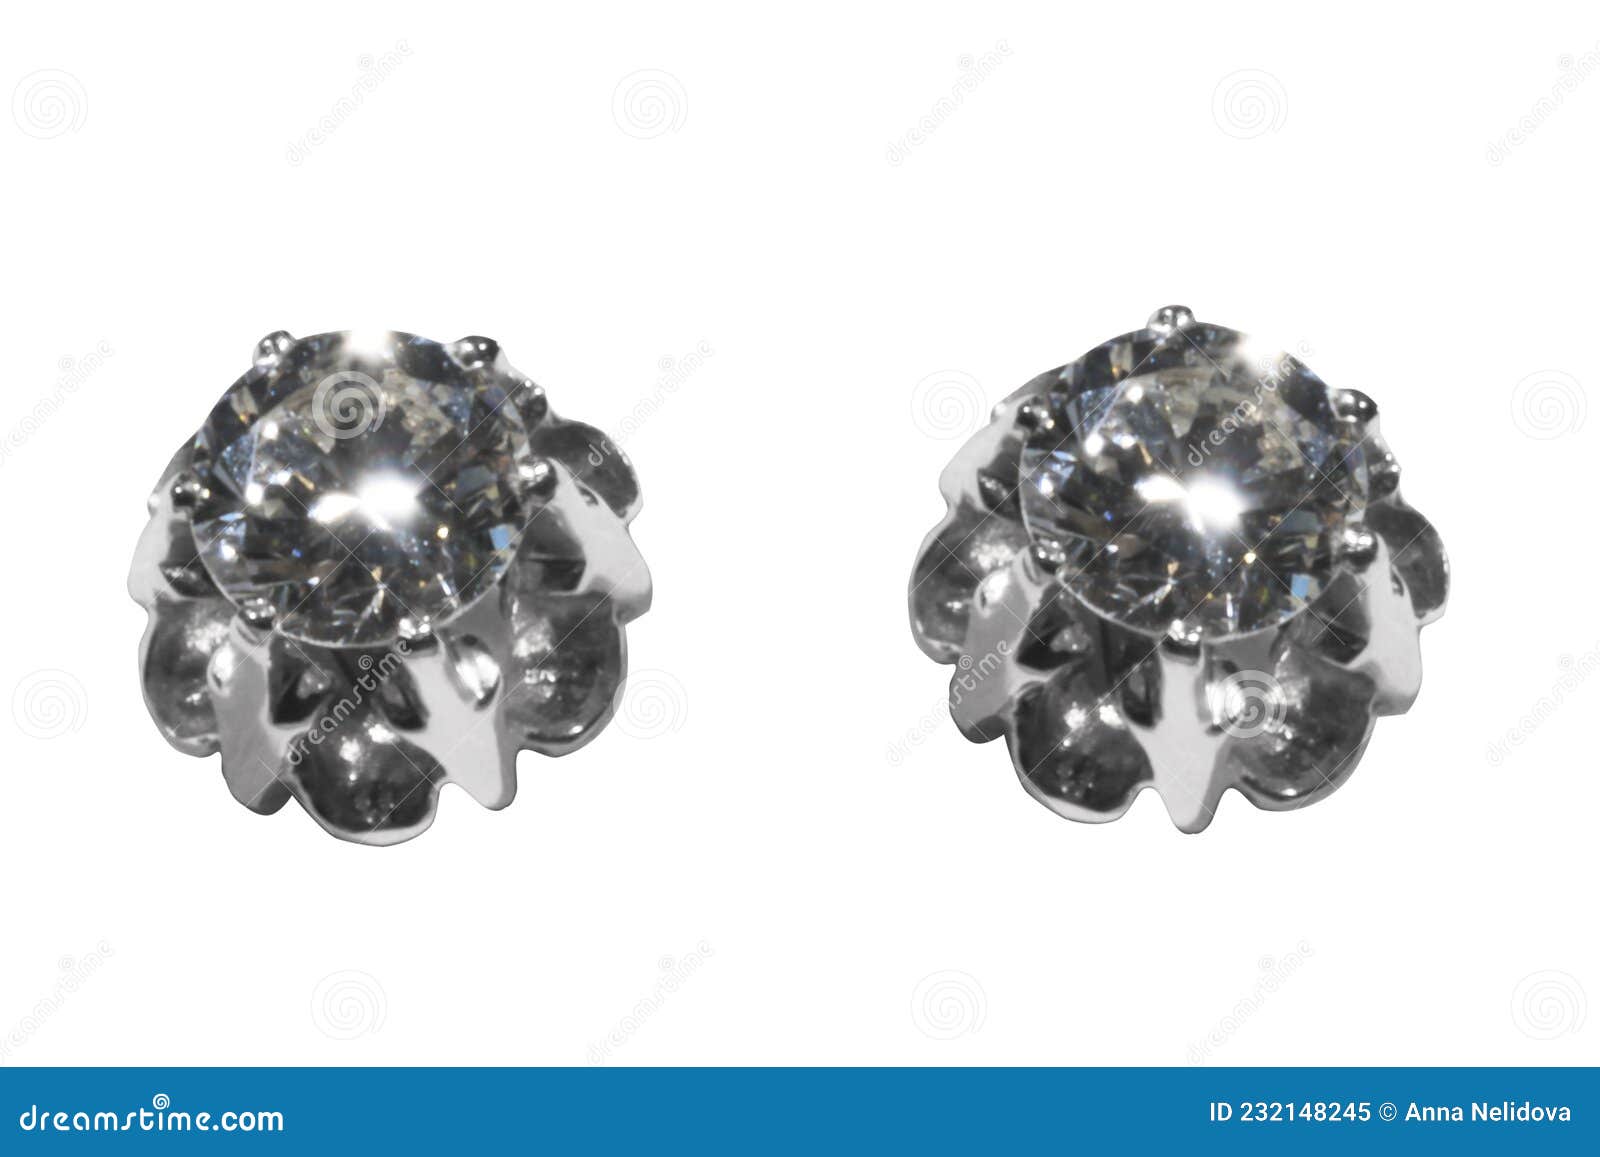 Big Round Solitaire Diamond Earring With One Earring De Focus Stock Photo -  Download Image Now - iStock